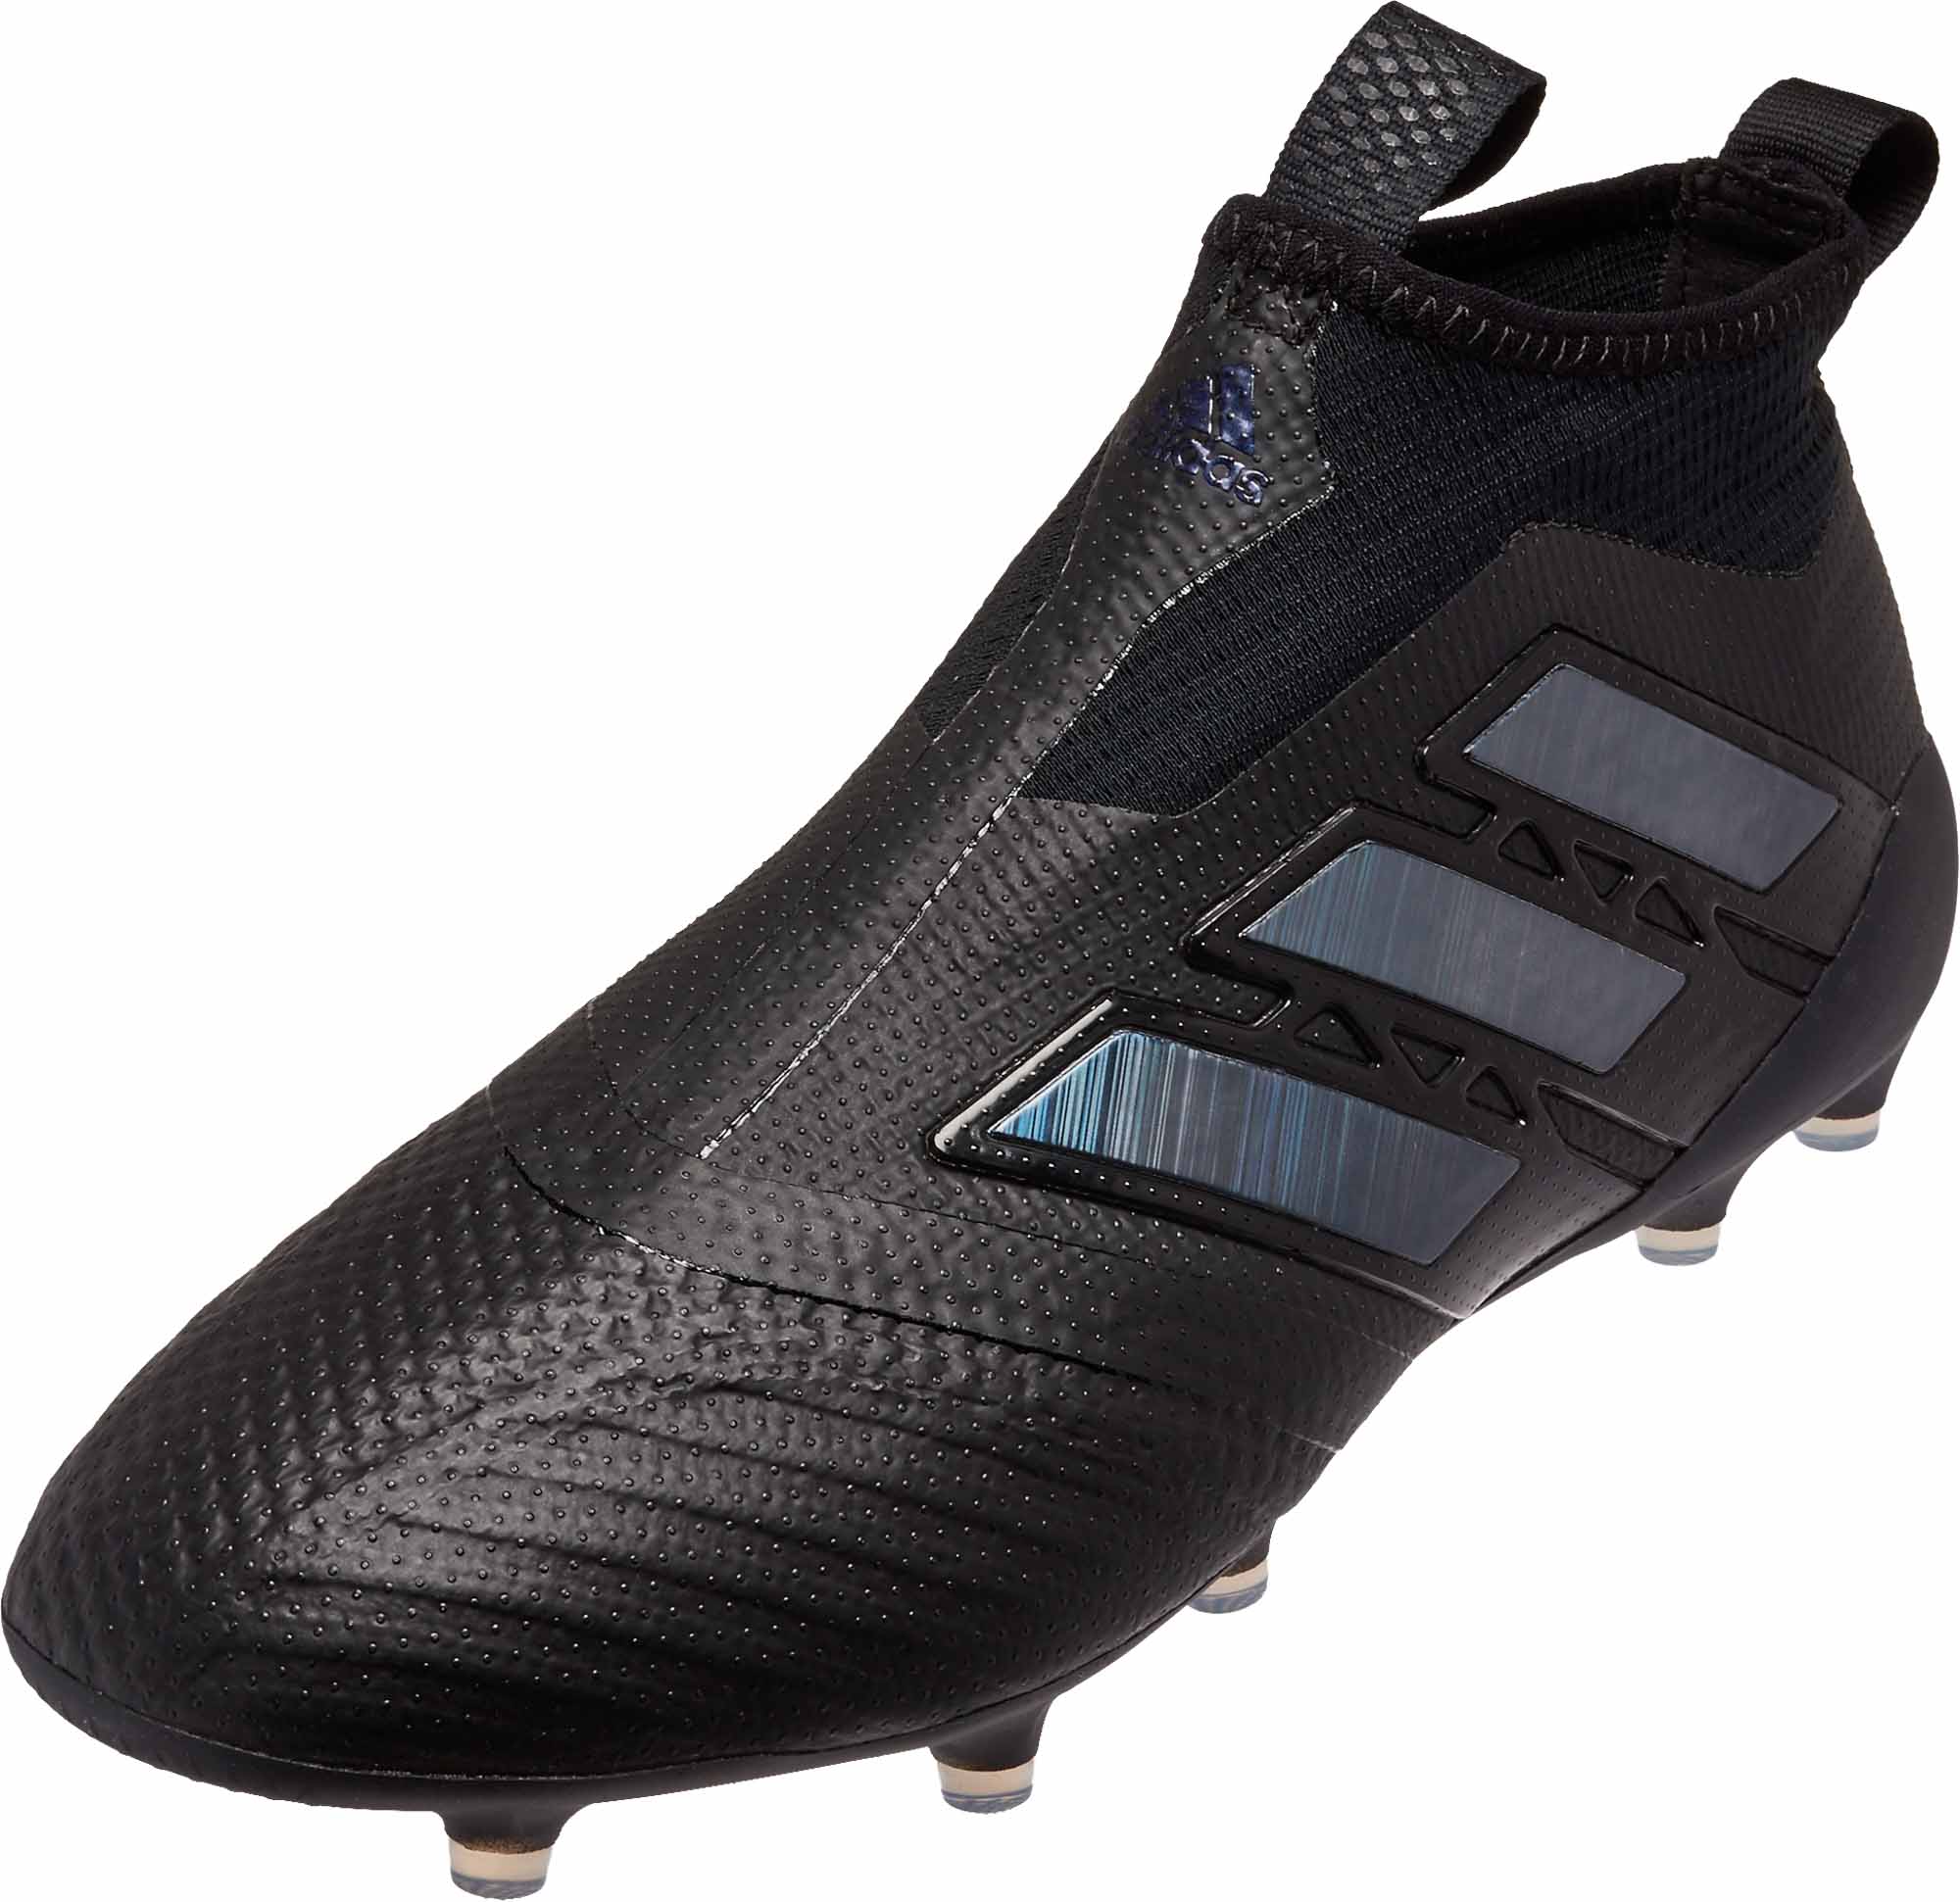 adidas all black soccer cleats